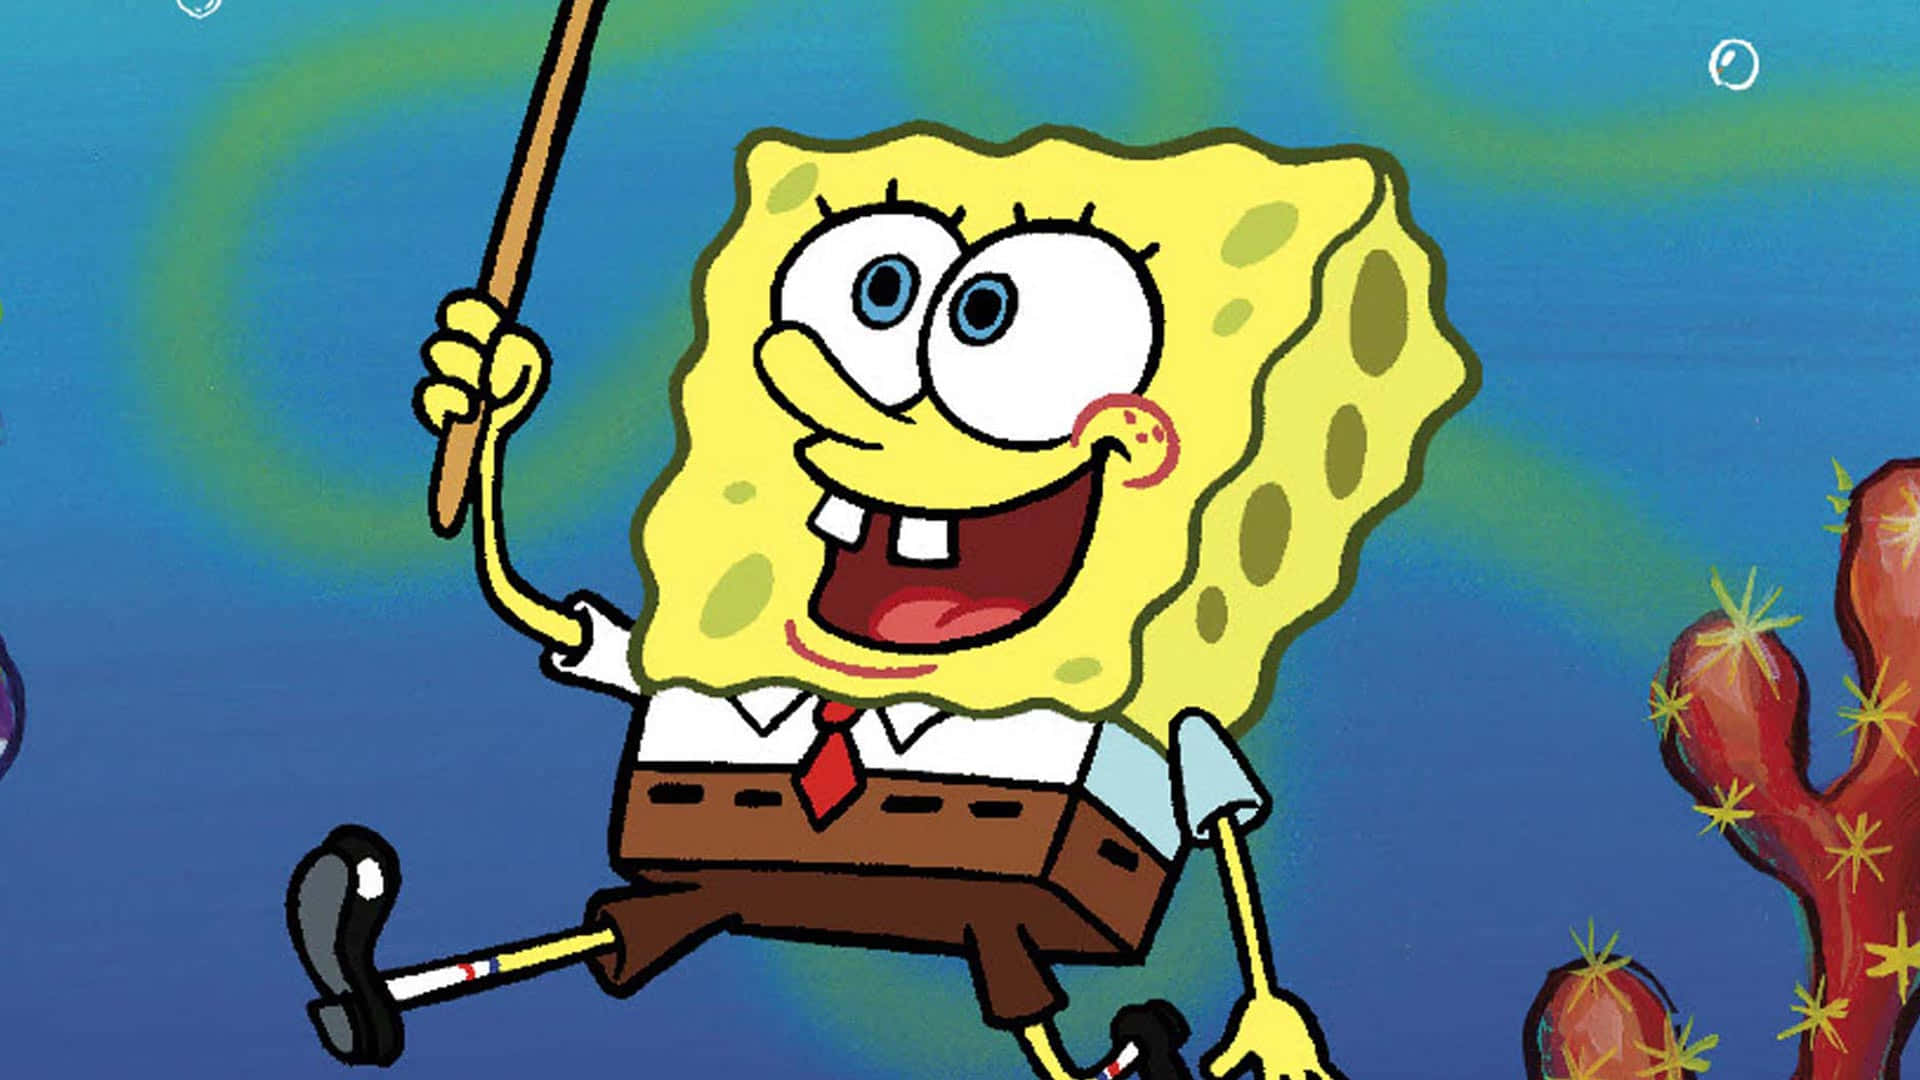 Join Spongebob on the Krusty Krab's most memorable adventures with friends like Patrick and Plankton! Wallpaper